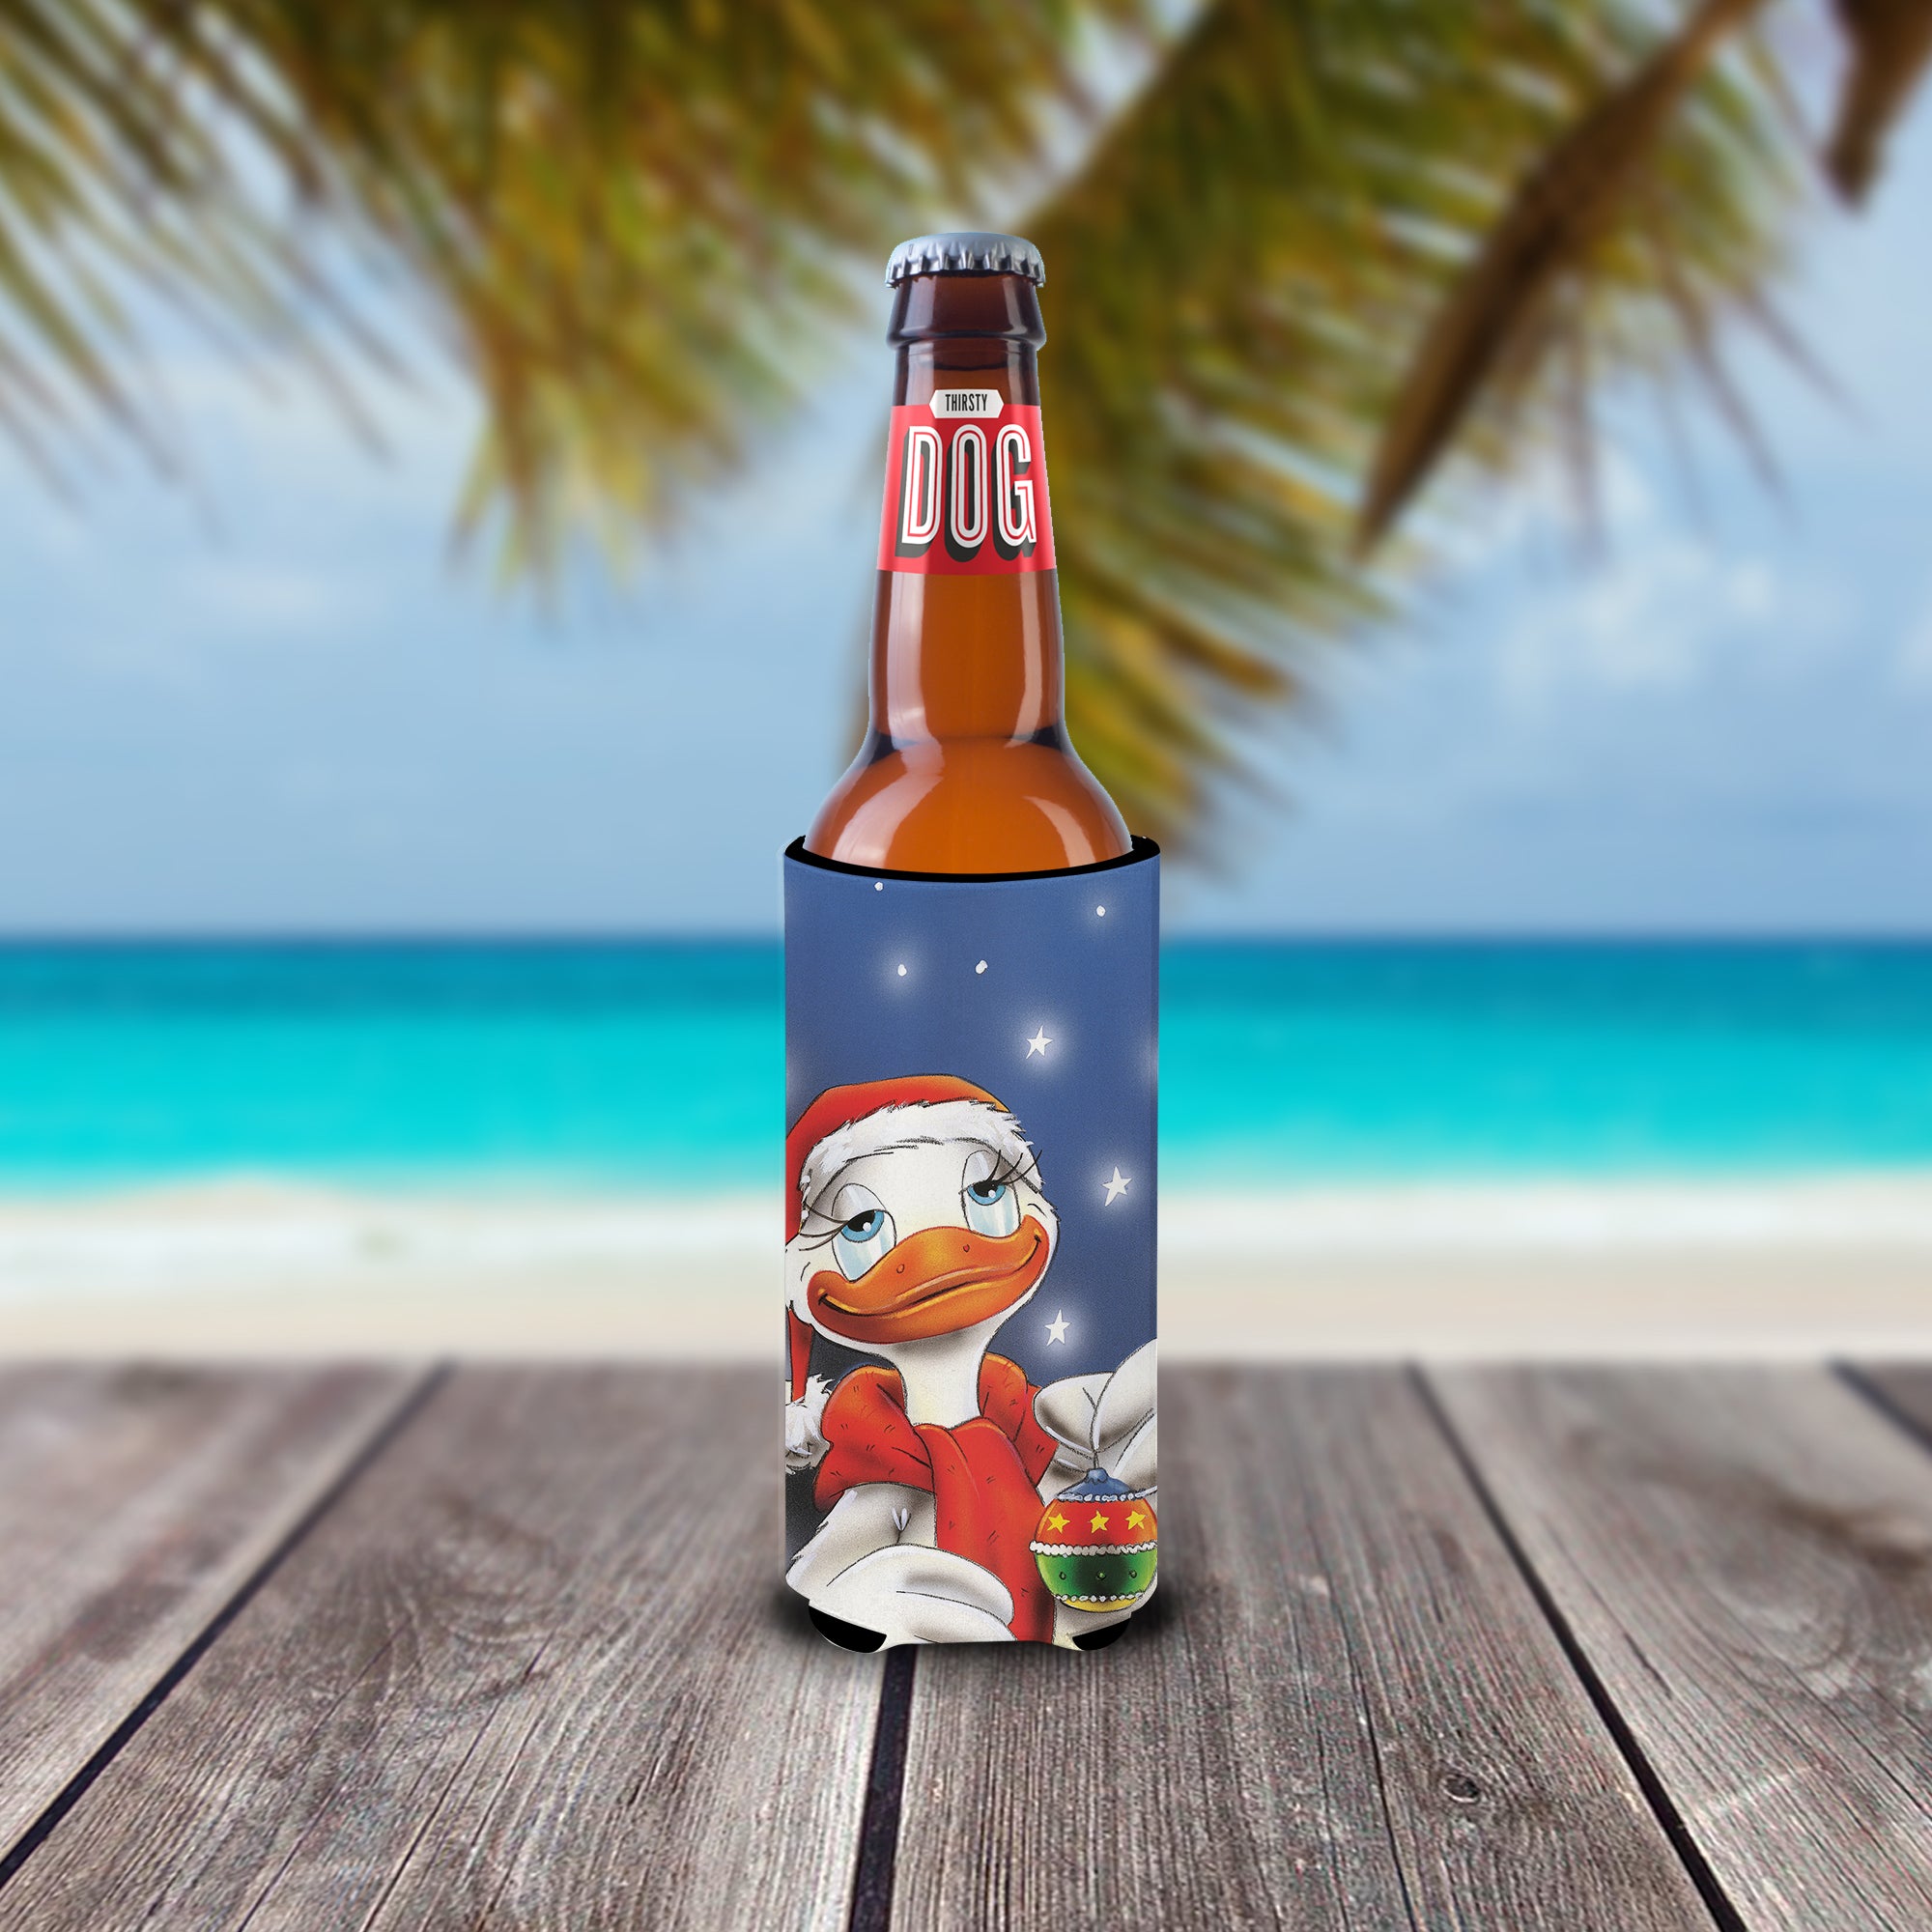 Duck with Christmas Ornament Ultra Beverage Insulators for slim cans AAH7196MUK